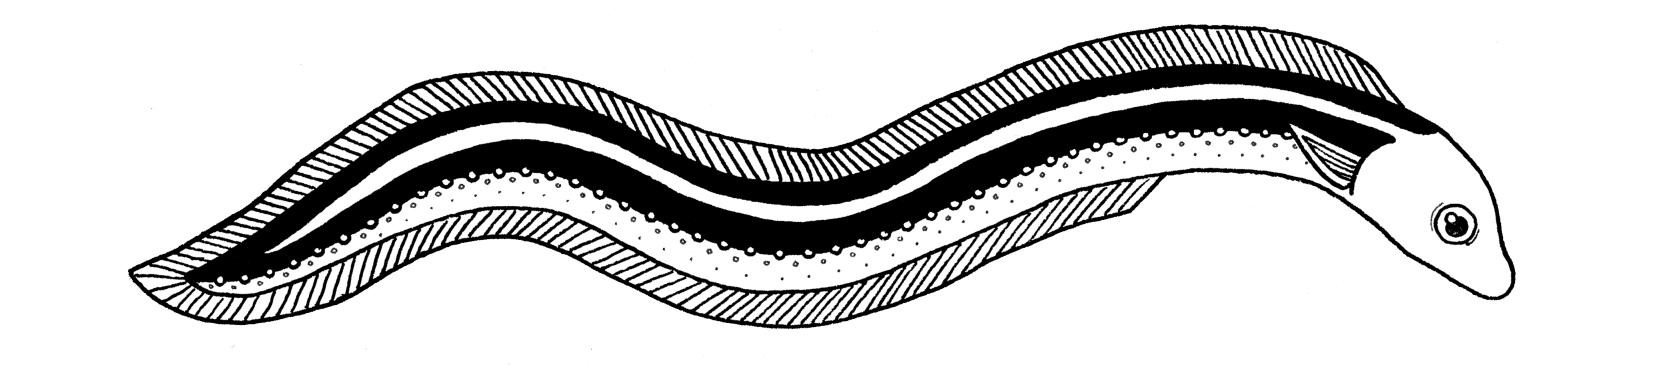 Black and white drawing of an eel